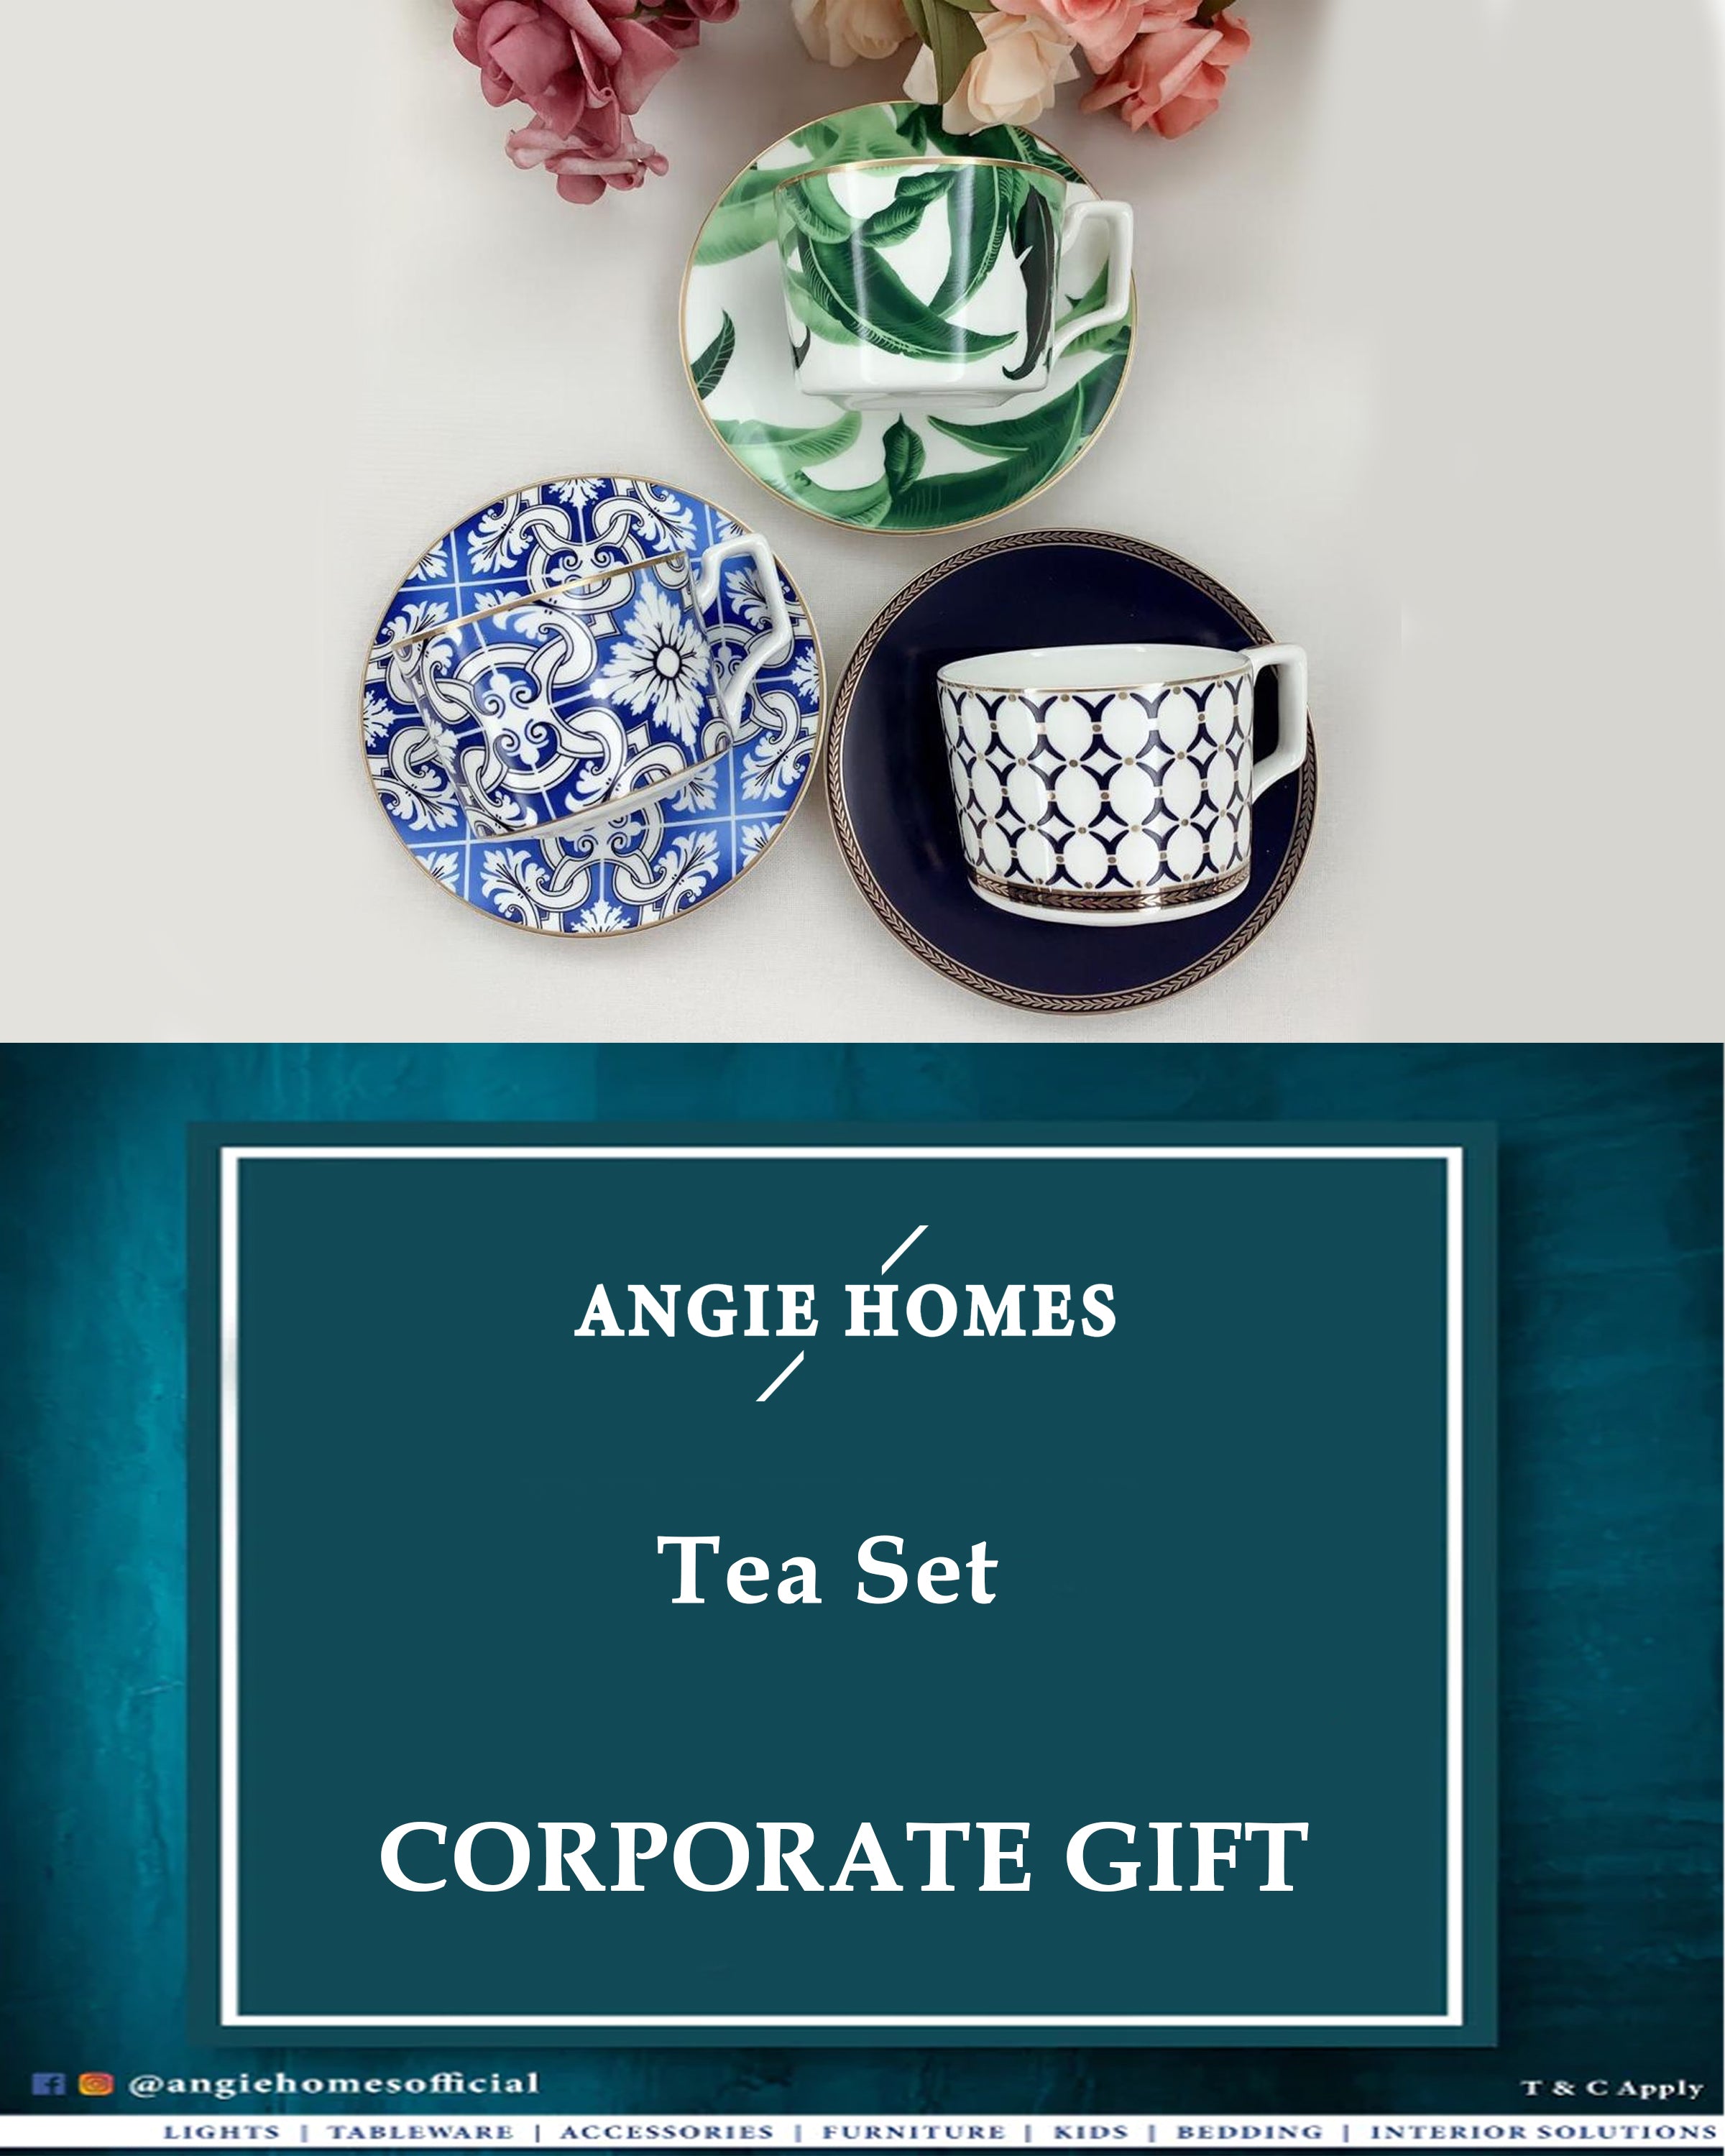 Bone China Cups and Saucers Tea Set for Weddings, House Warming & Corporate Gifts ANGIE HOMES